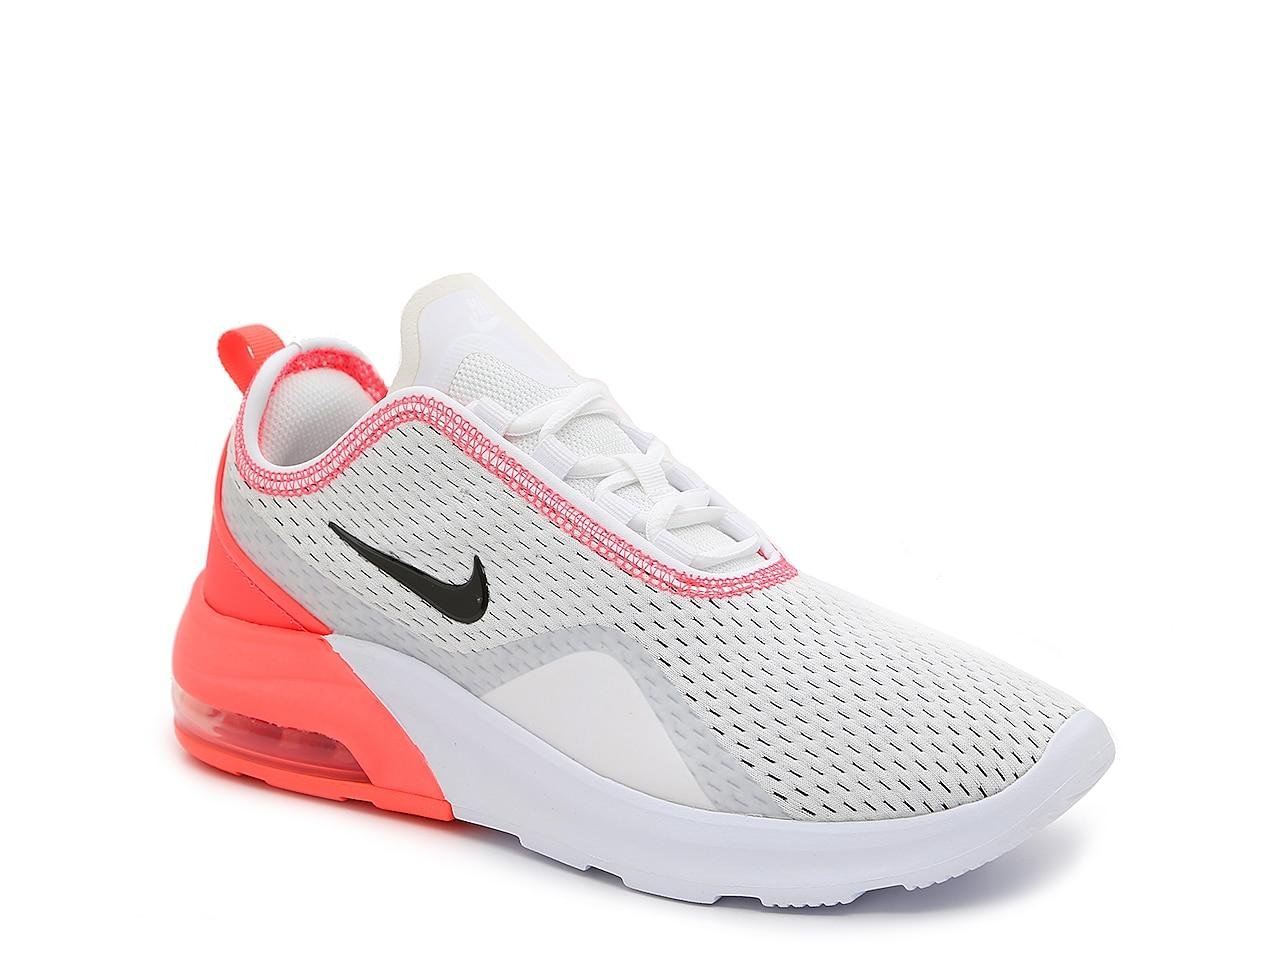 Nike Synthetic Air Max Motion 2 Sneaker in White/Orange (White) - Lyst